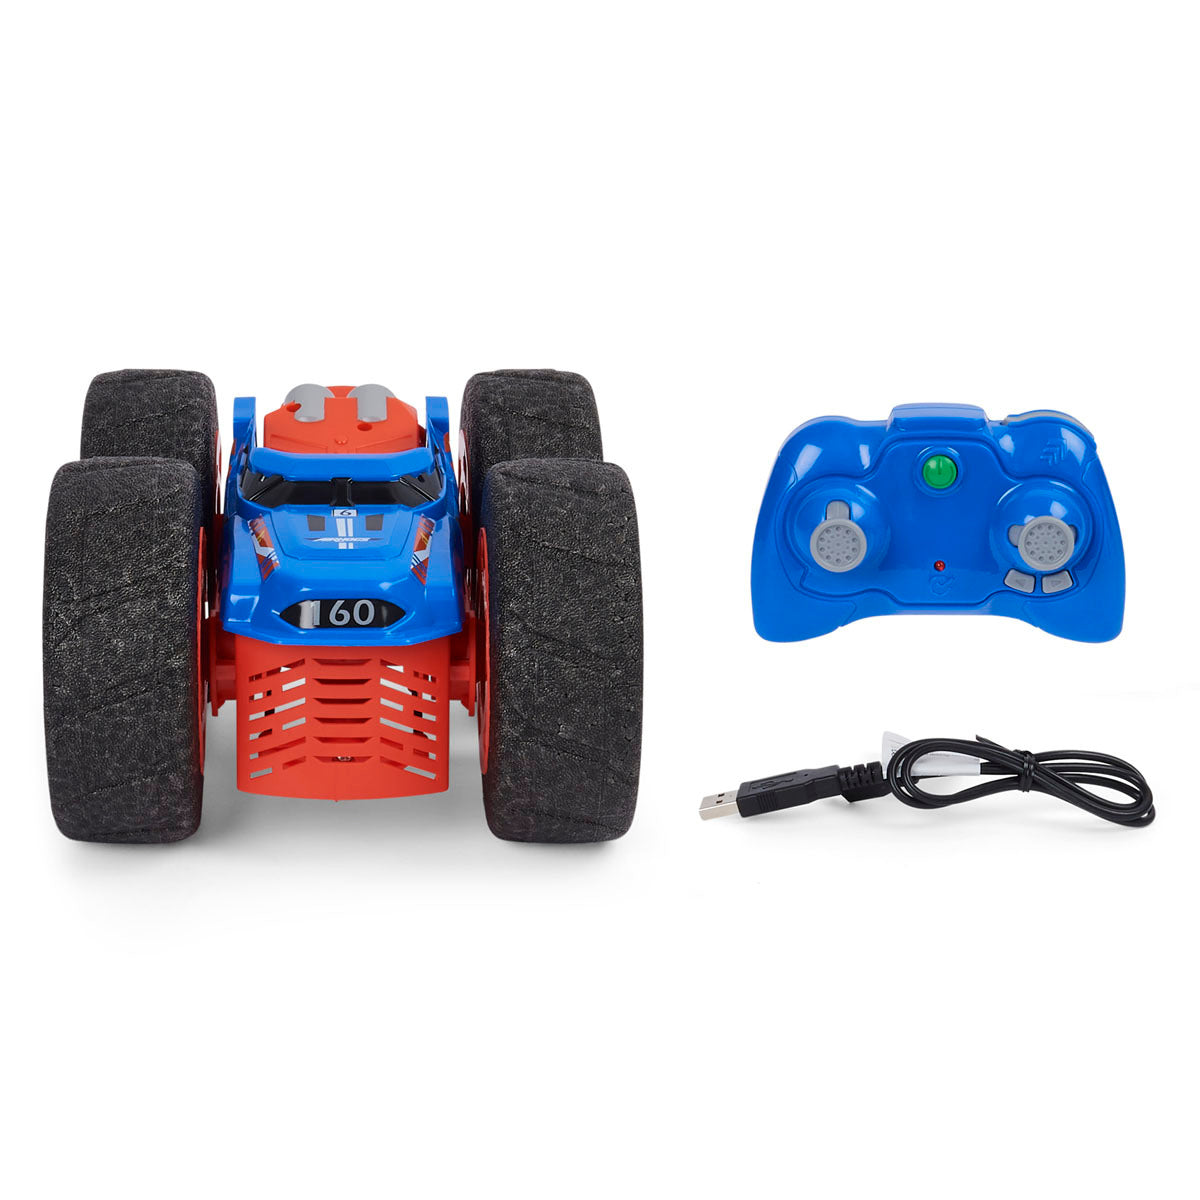 Air Hogs Jump Fury Supersoft Remote Control Vehicle